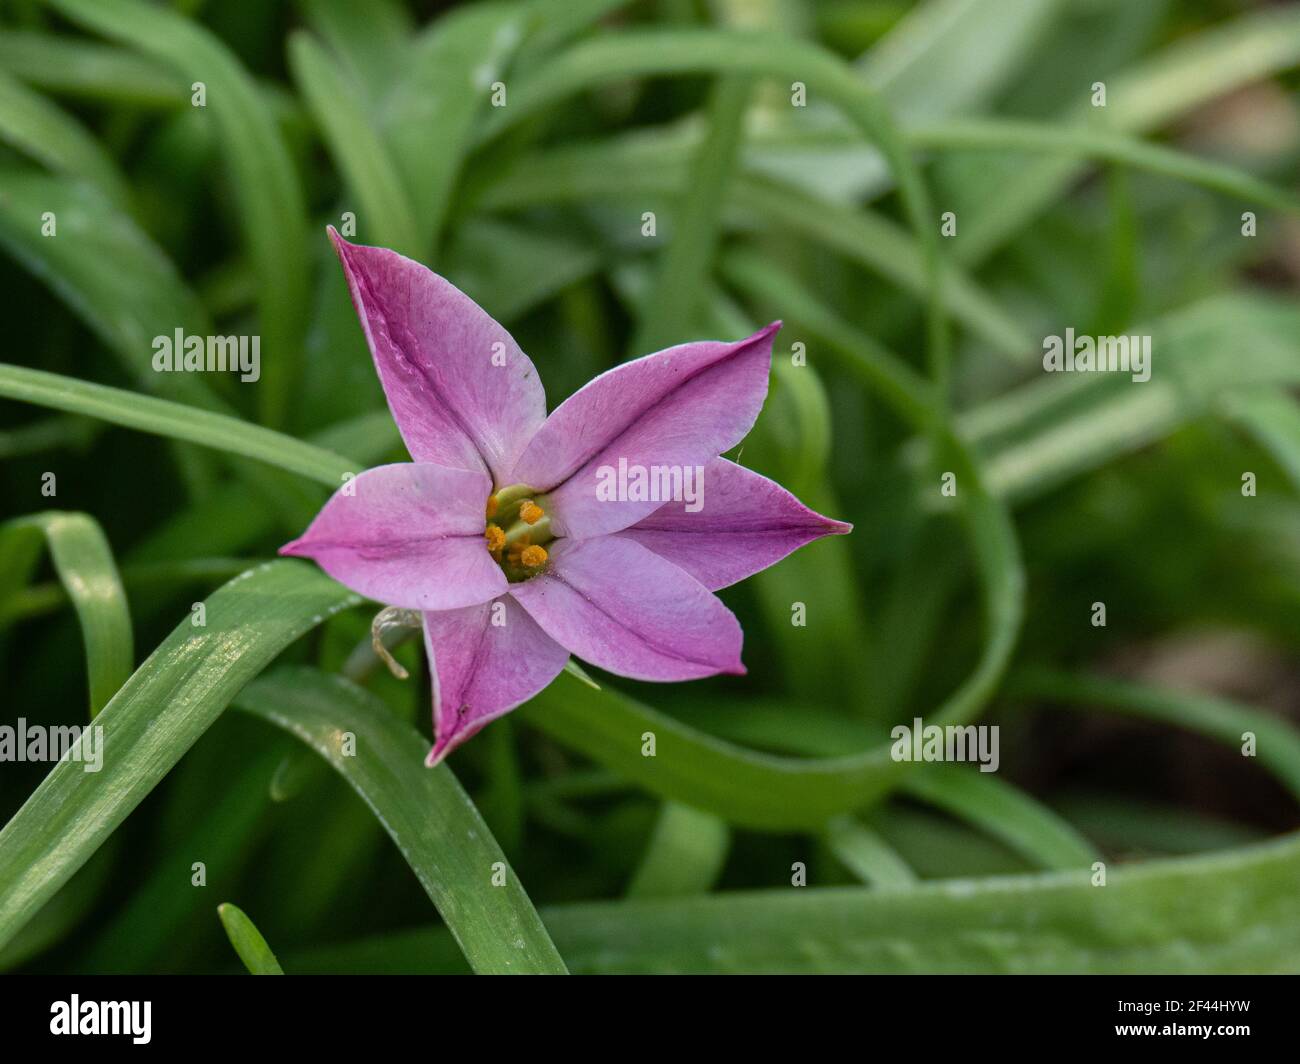 A close up of a single flower of the pink Ipheion uniflorum 'Charlotte Bishop' Stock Photo